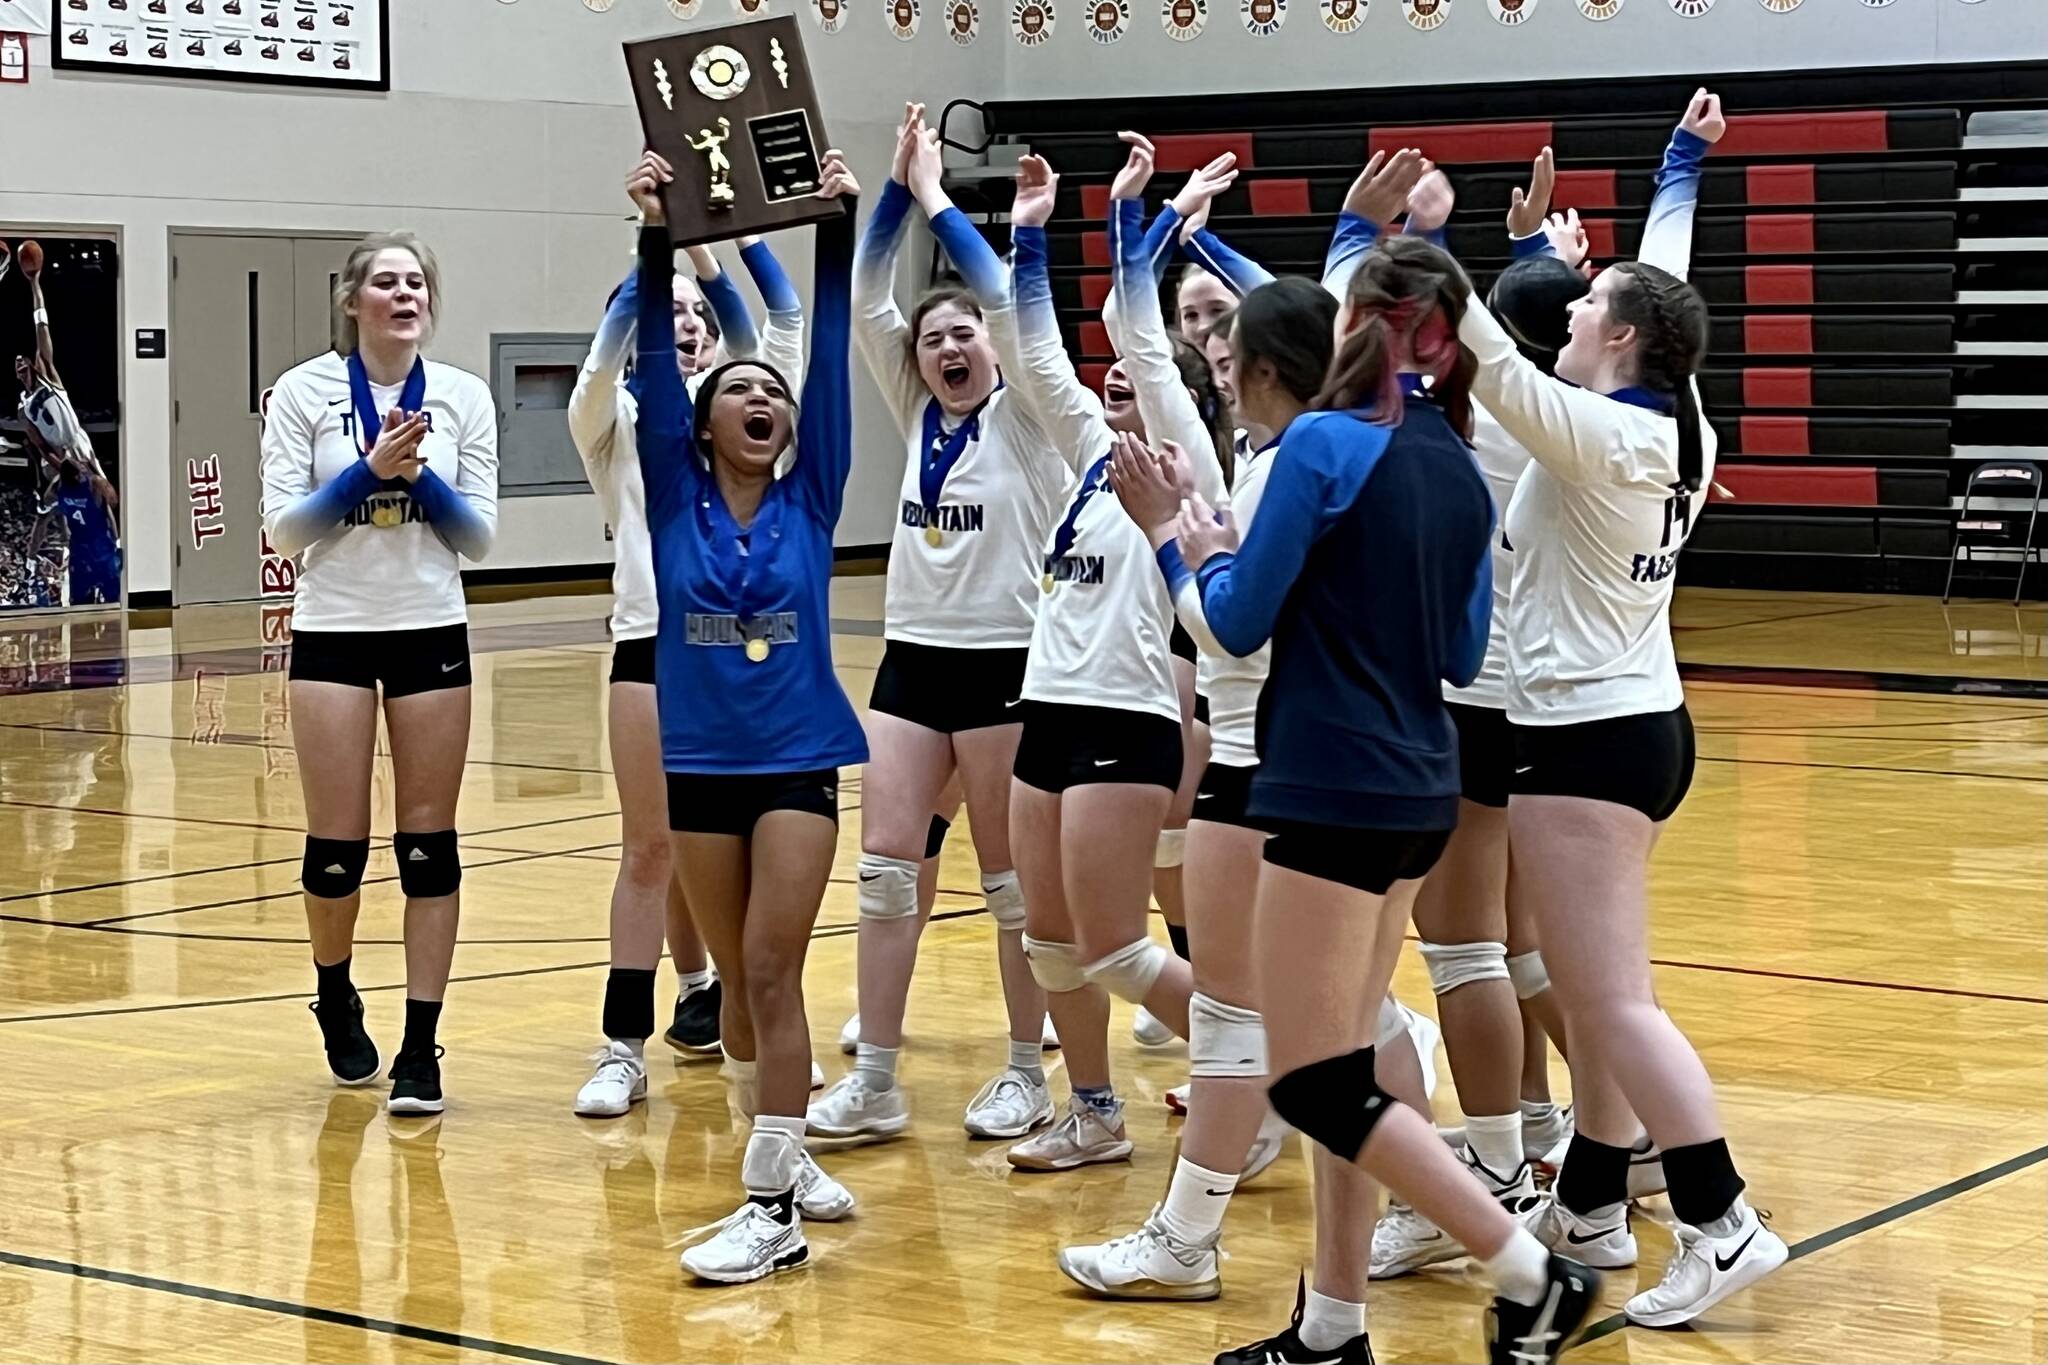 Thunder Mountain girls varsity volleyball team celebrating their championship victory against JDHS on Saturday, Nov. 5. TMHS now heads to the state tournament in Anchorage to face Colony in the first round on Thursday, Nov. 10. (Jonson Kuhn / Juneau Empire)